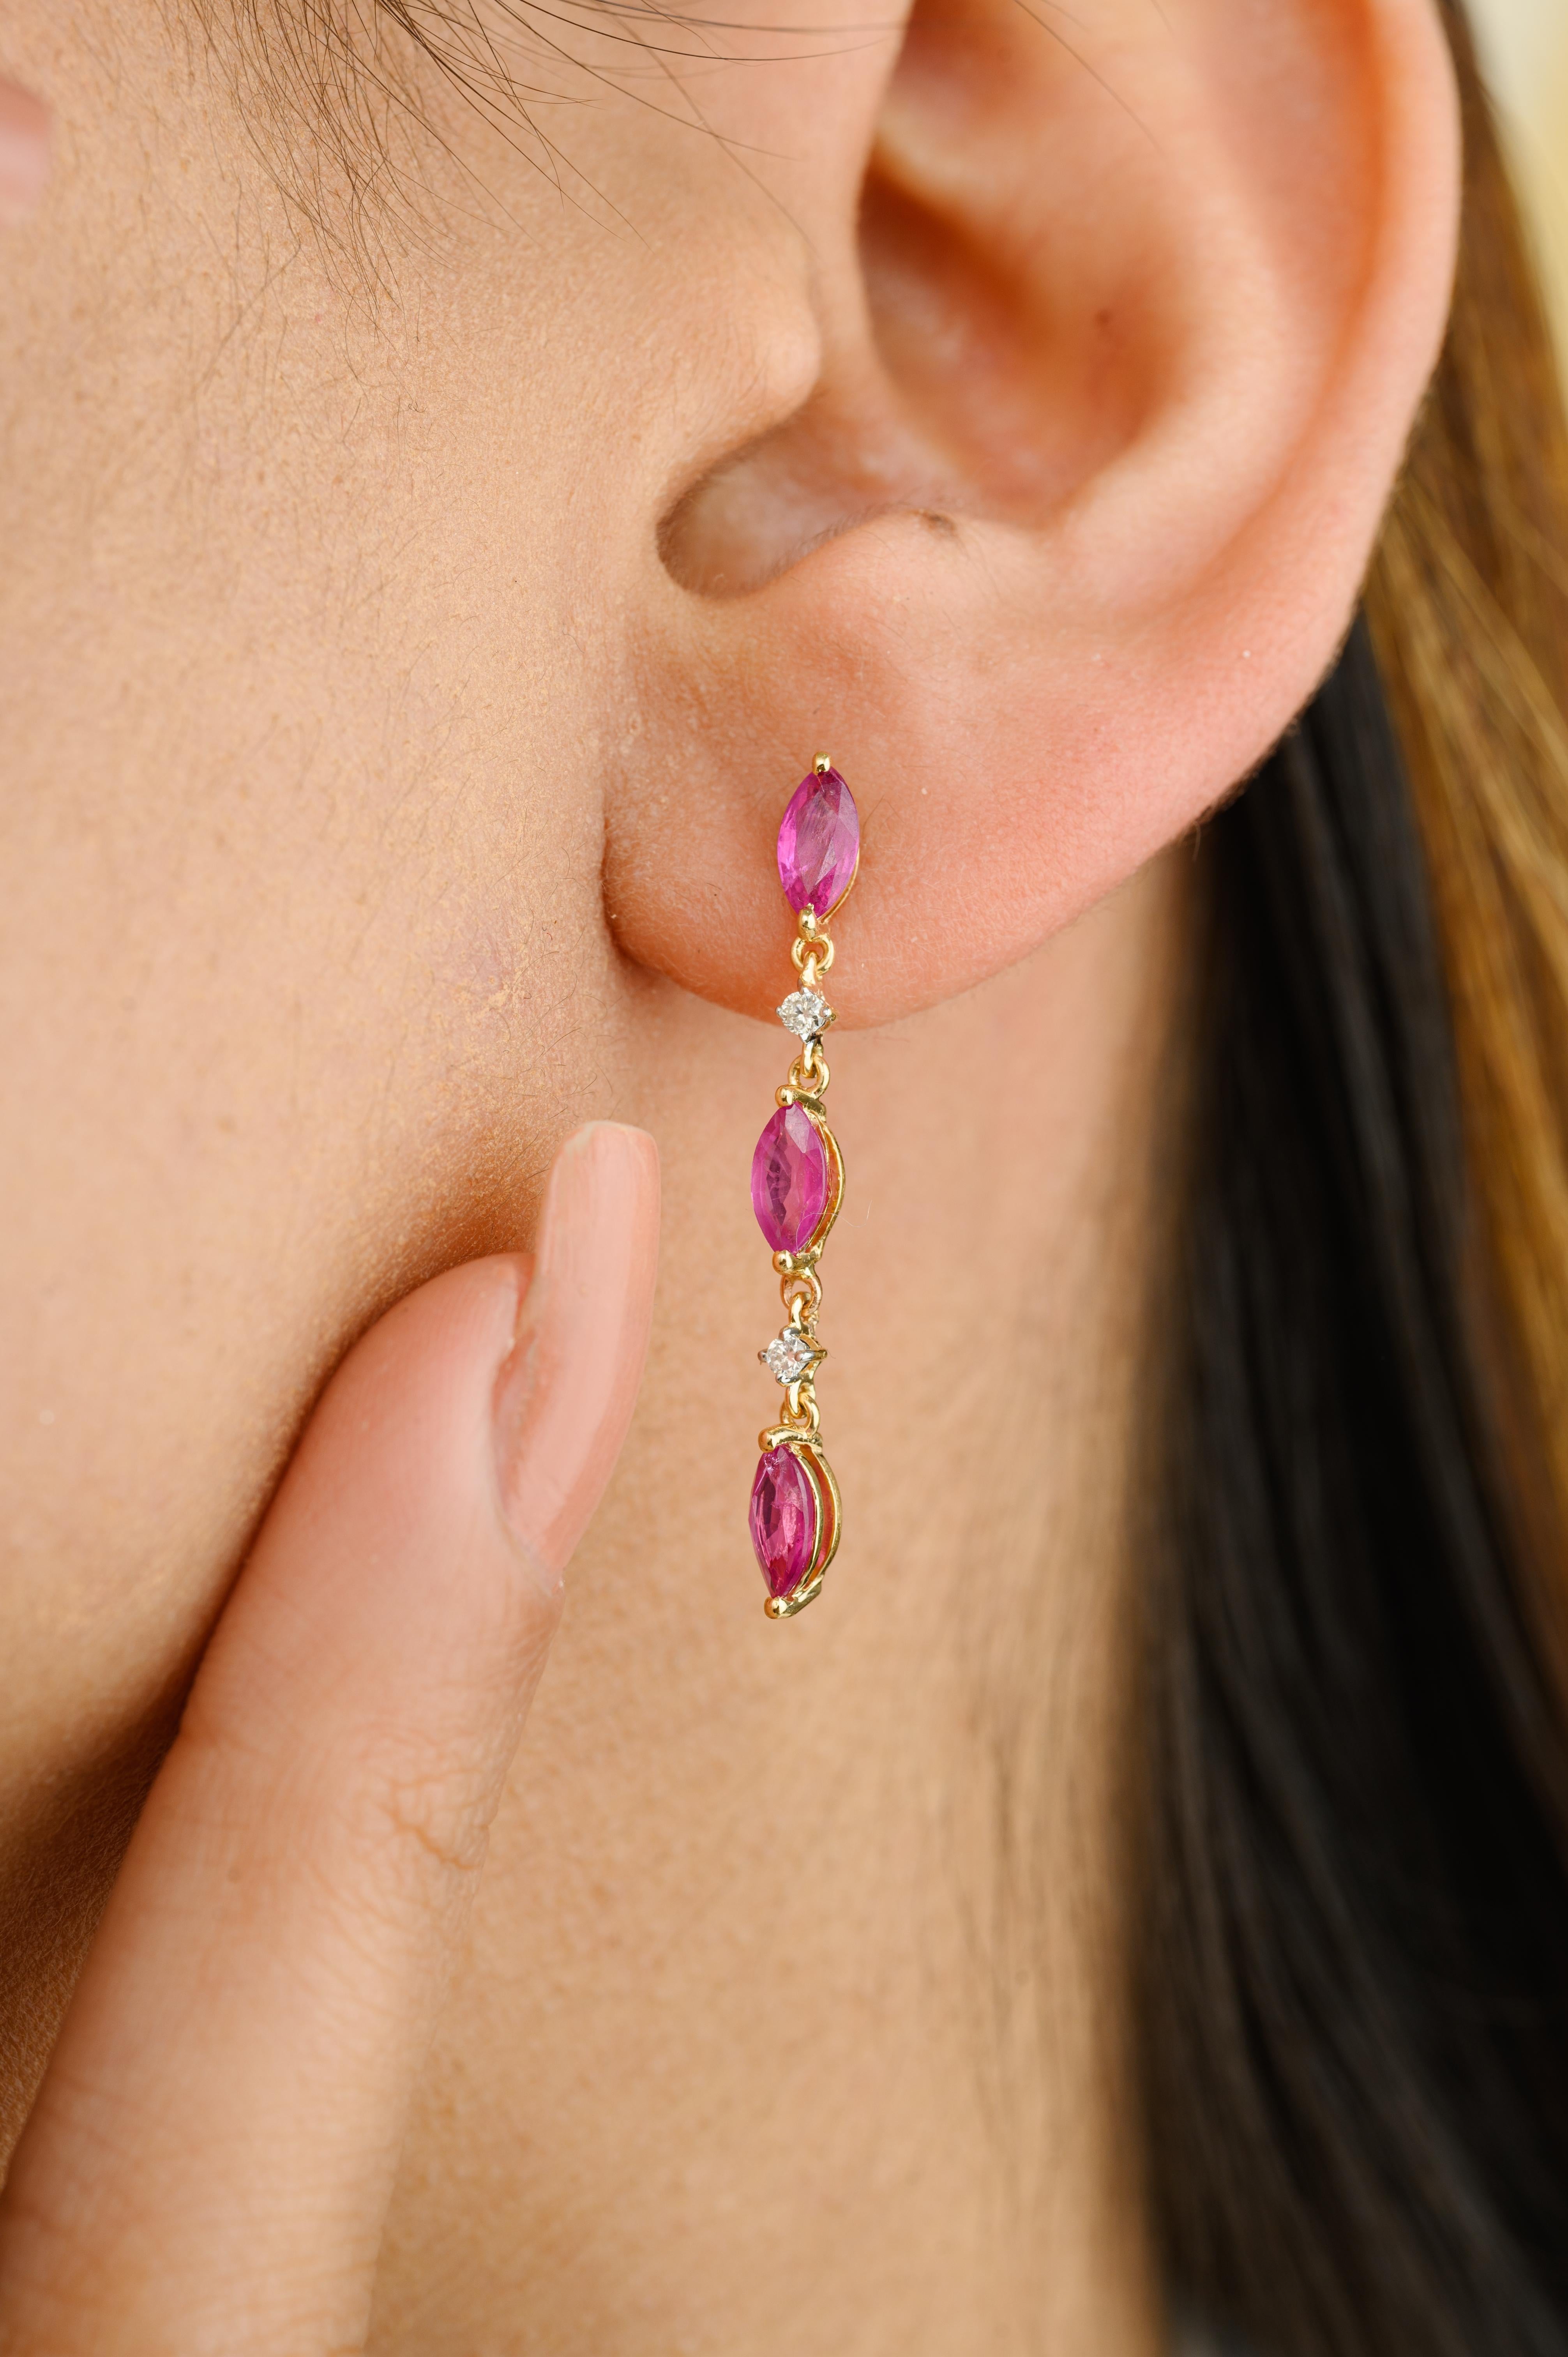 Minimal Marquise Ruby Diamond Dangle Earrings in 18K Gold to make a statement with your look. You shall need dangle earrings to make a statement with your look. These earrings create a sparkling, luxurious look featuring marquise cut ruby.
Ruby